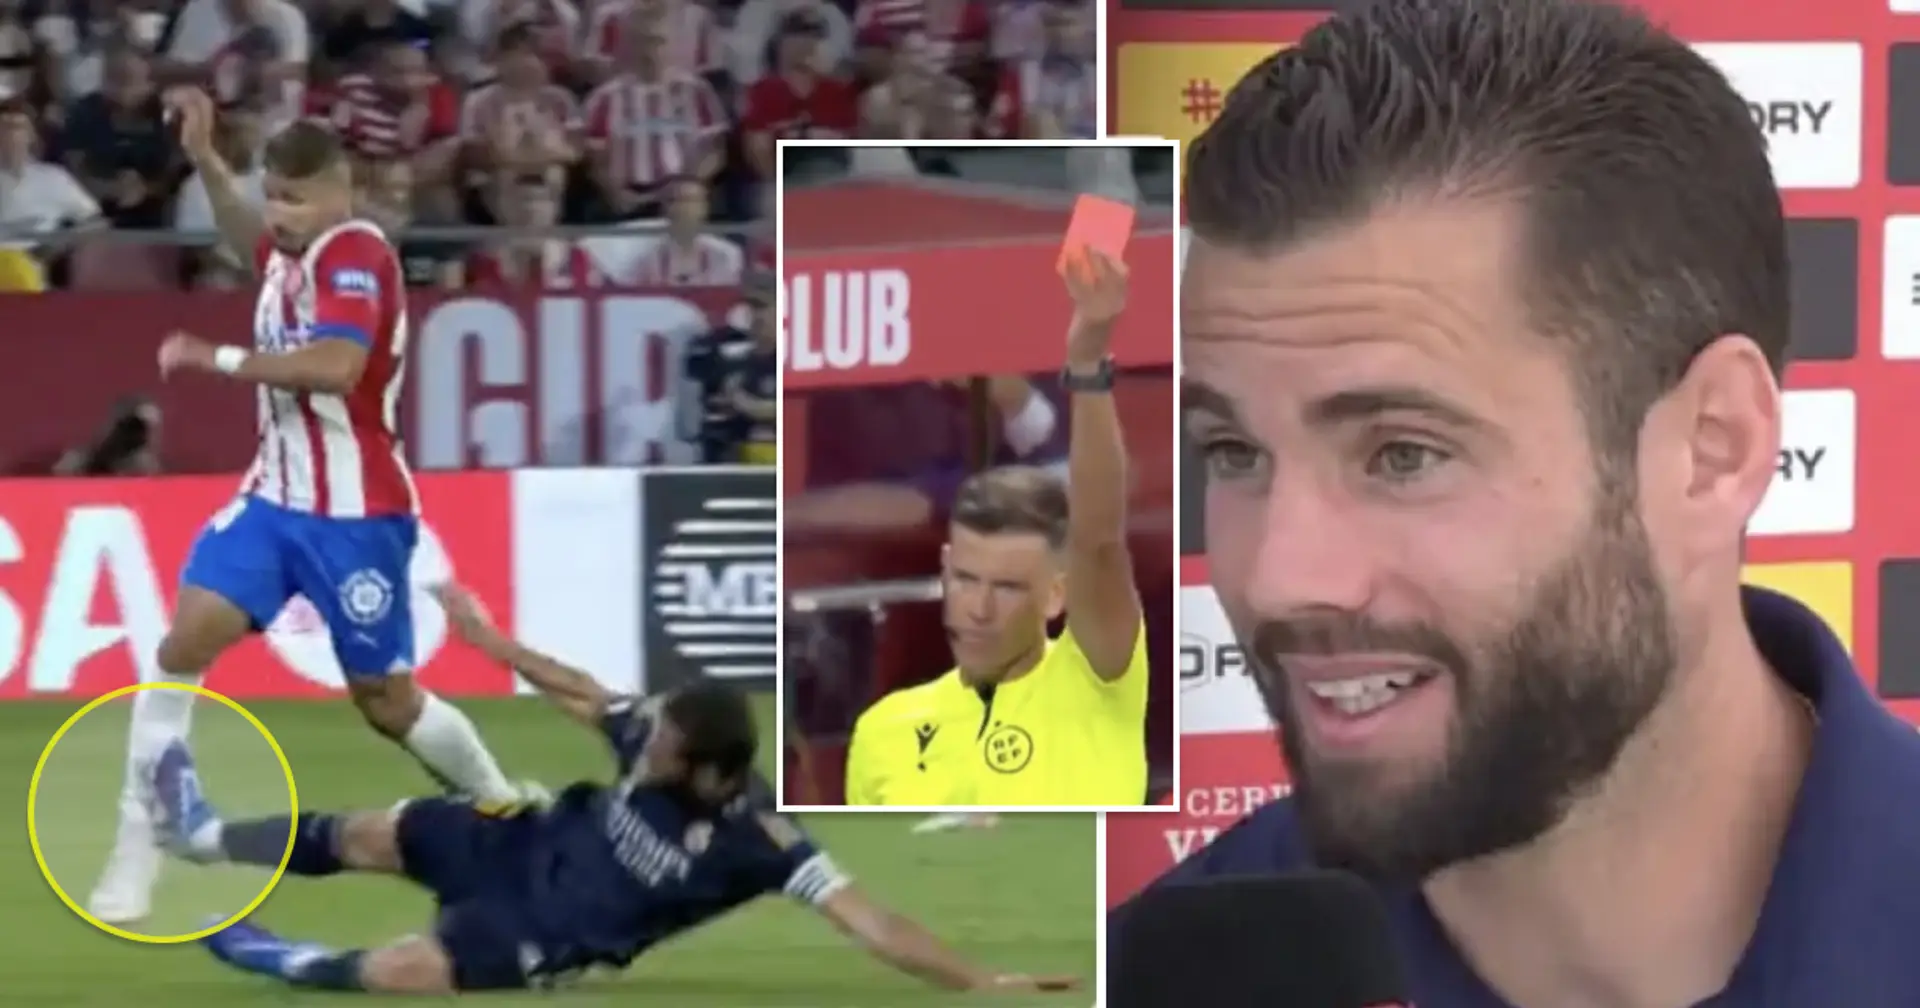 How many games could Nacho miss after Girona red card? Answered